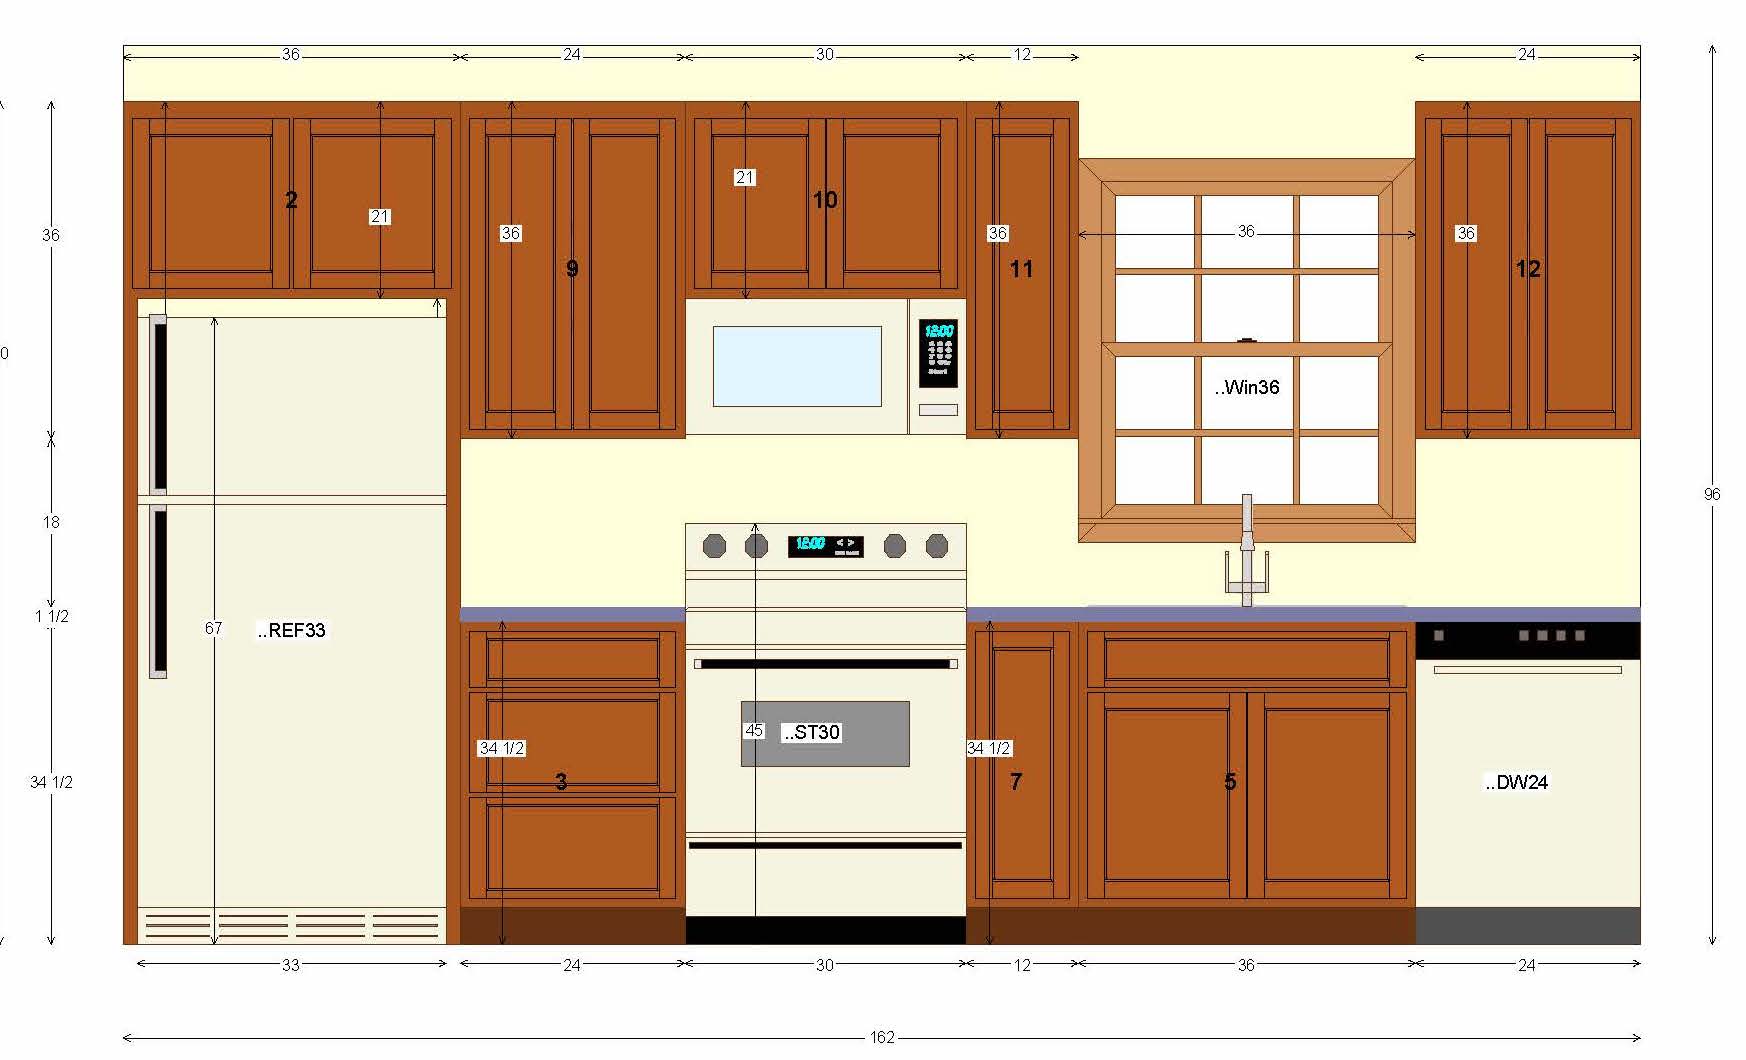 A diagram of a single wall kitchen layout.